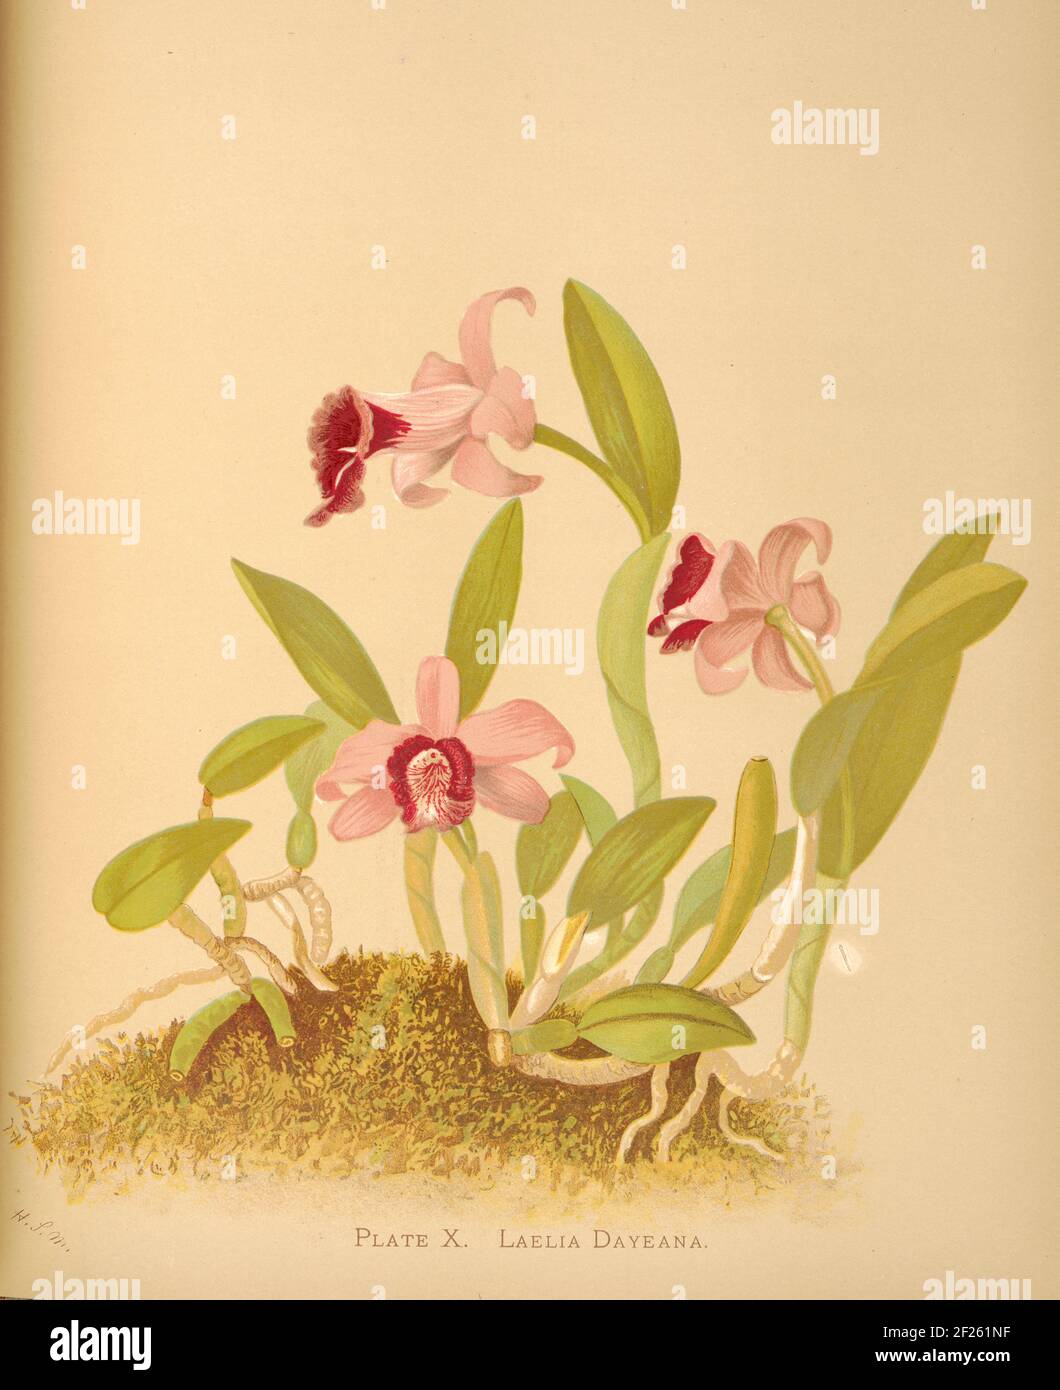 Harriet Stewart Miner's botanical vintage illustration from Orchids - The Royal Family of Plants from 1885 - Laelia dayeana Stock Photo